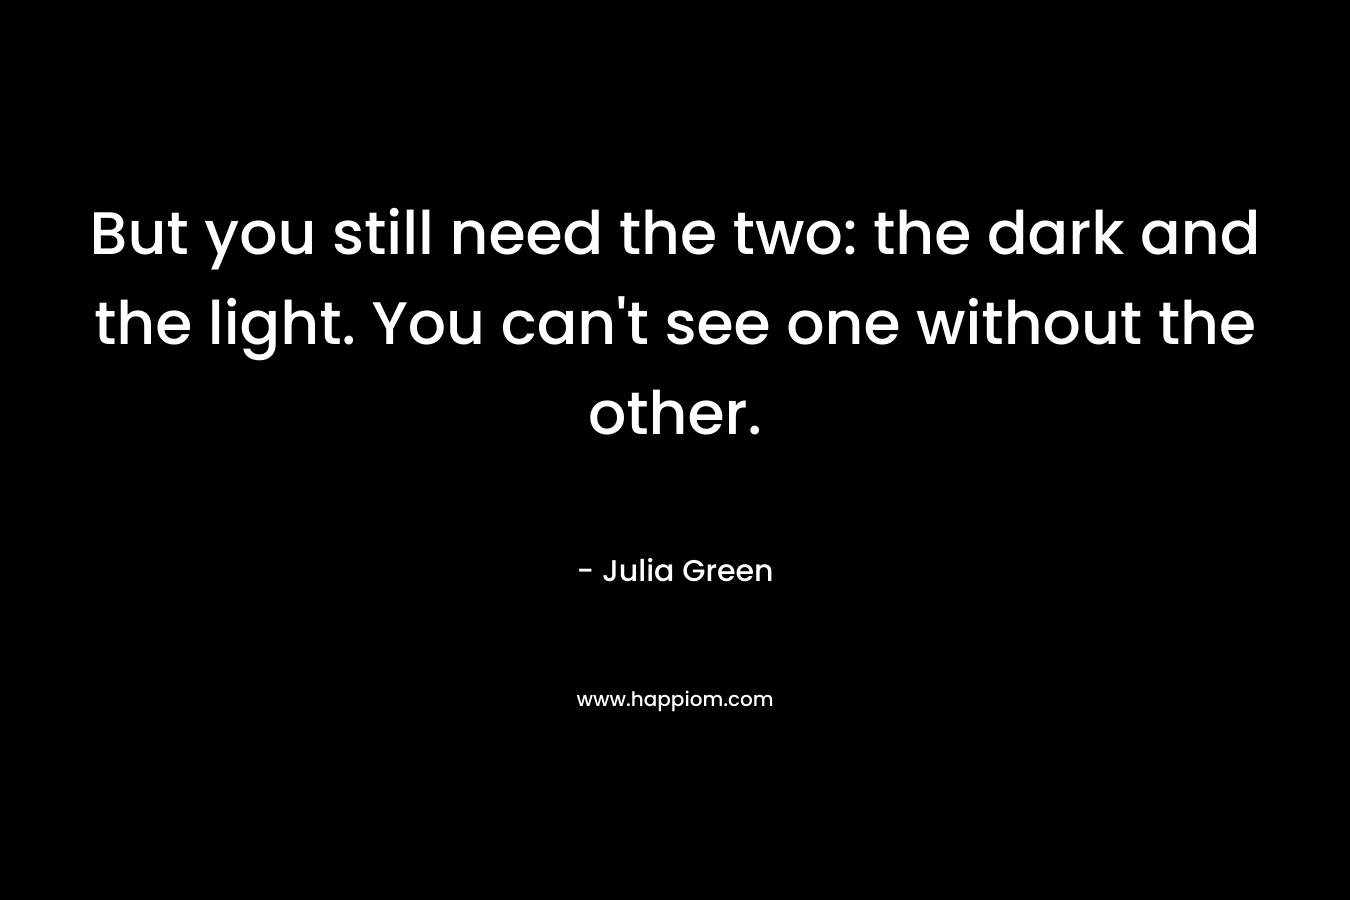 But you still need the two: the dark and the light. You can’t see one without the other. – Julia Green